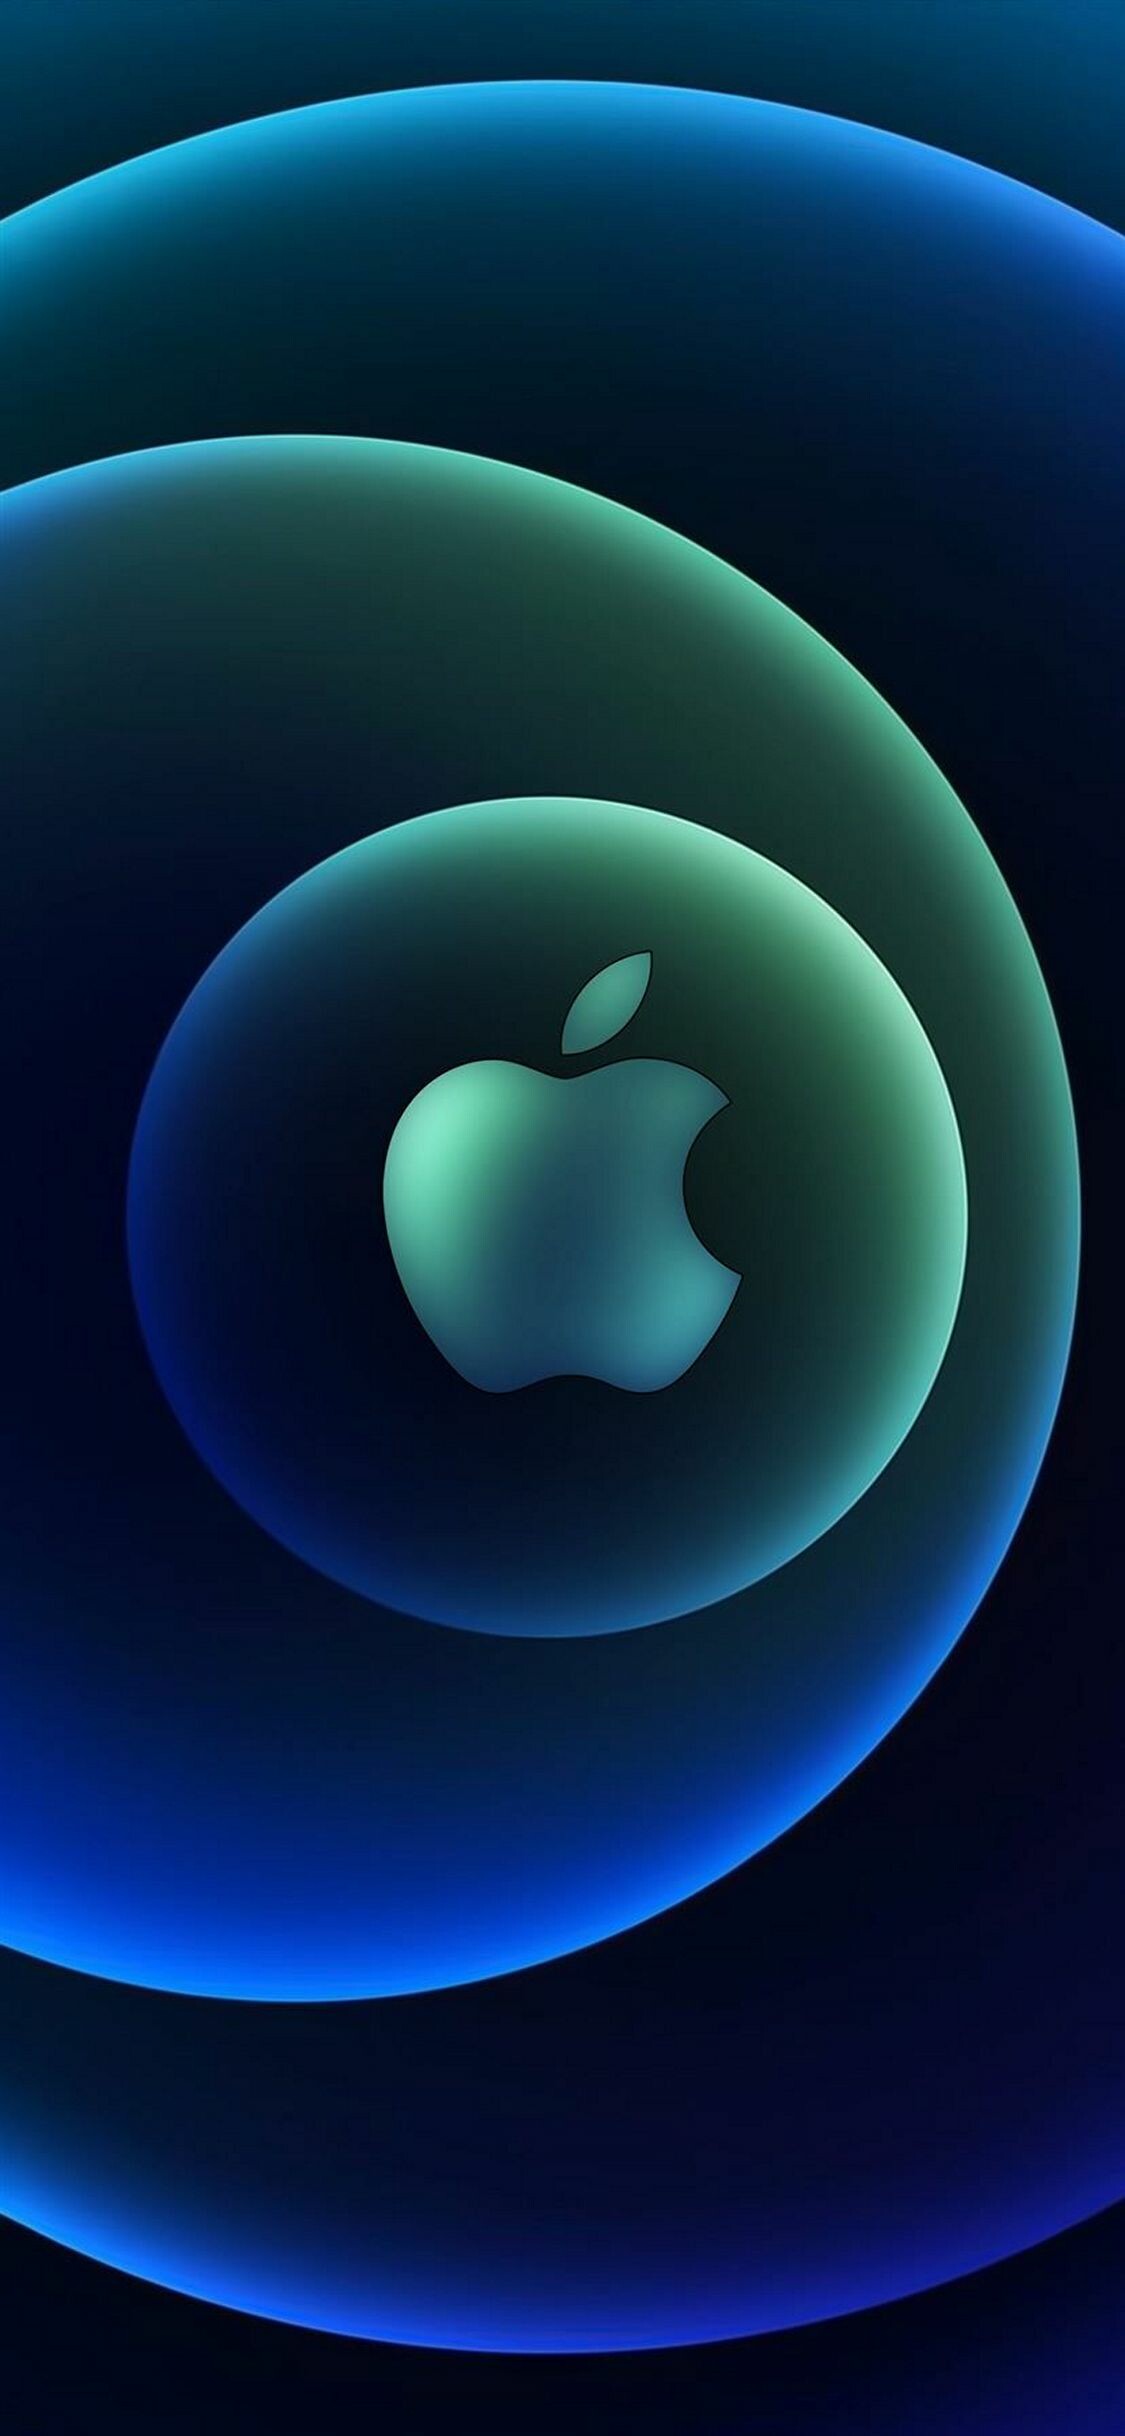 Apple Logo: A cell phone that works like a computer, Symbol. 1130x2440 HD Wallpaper.